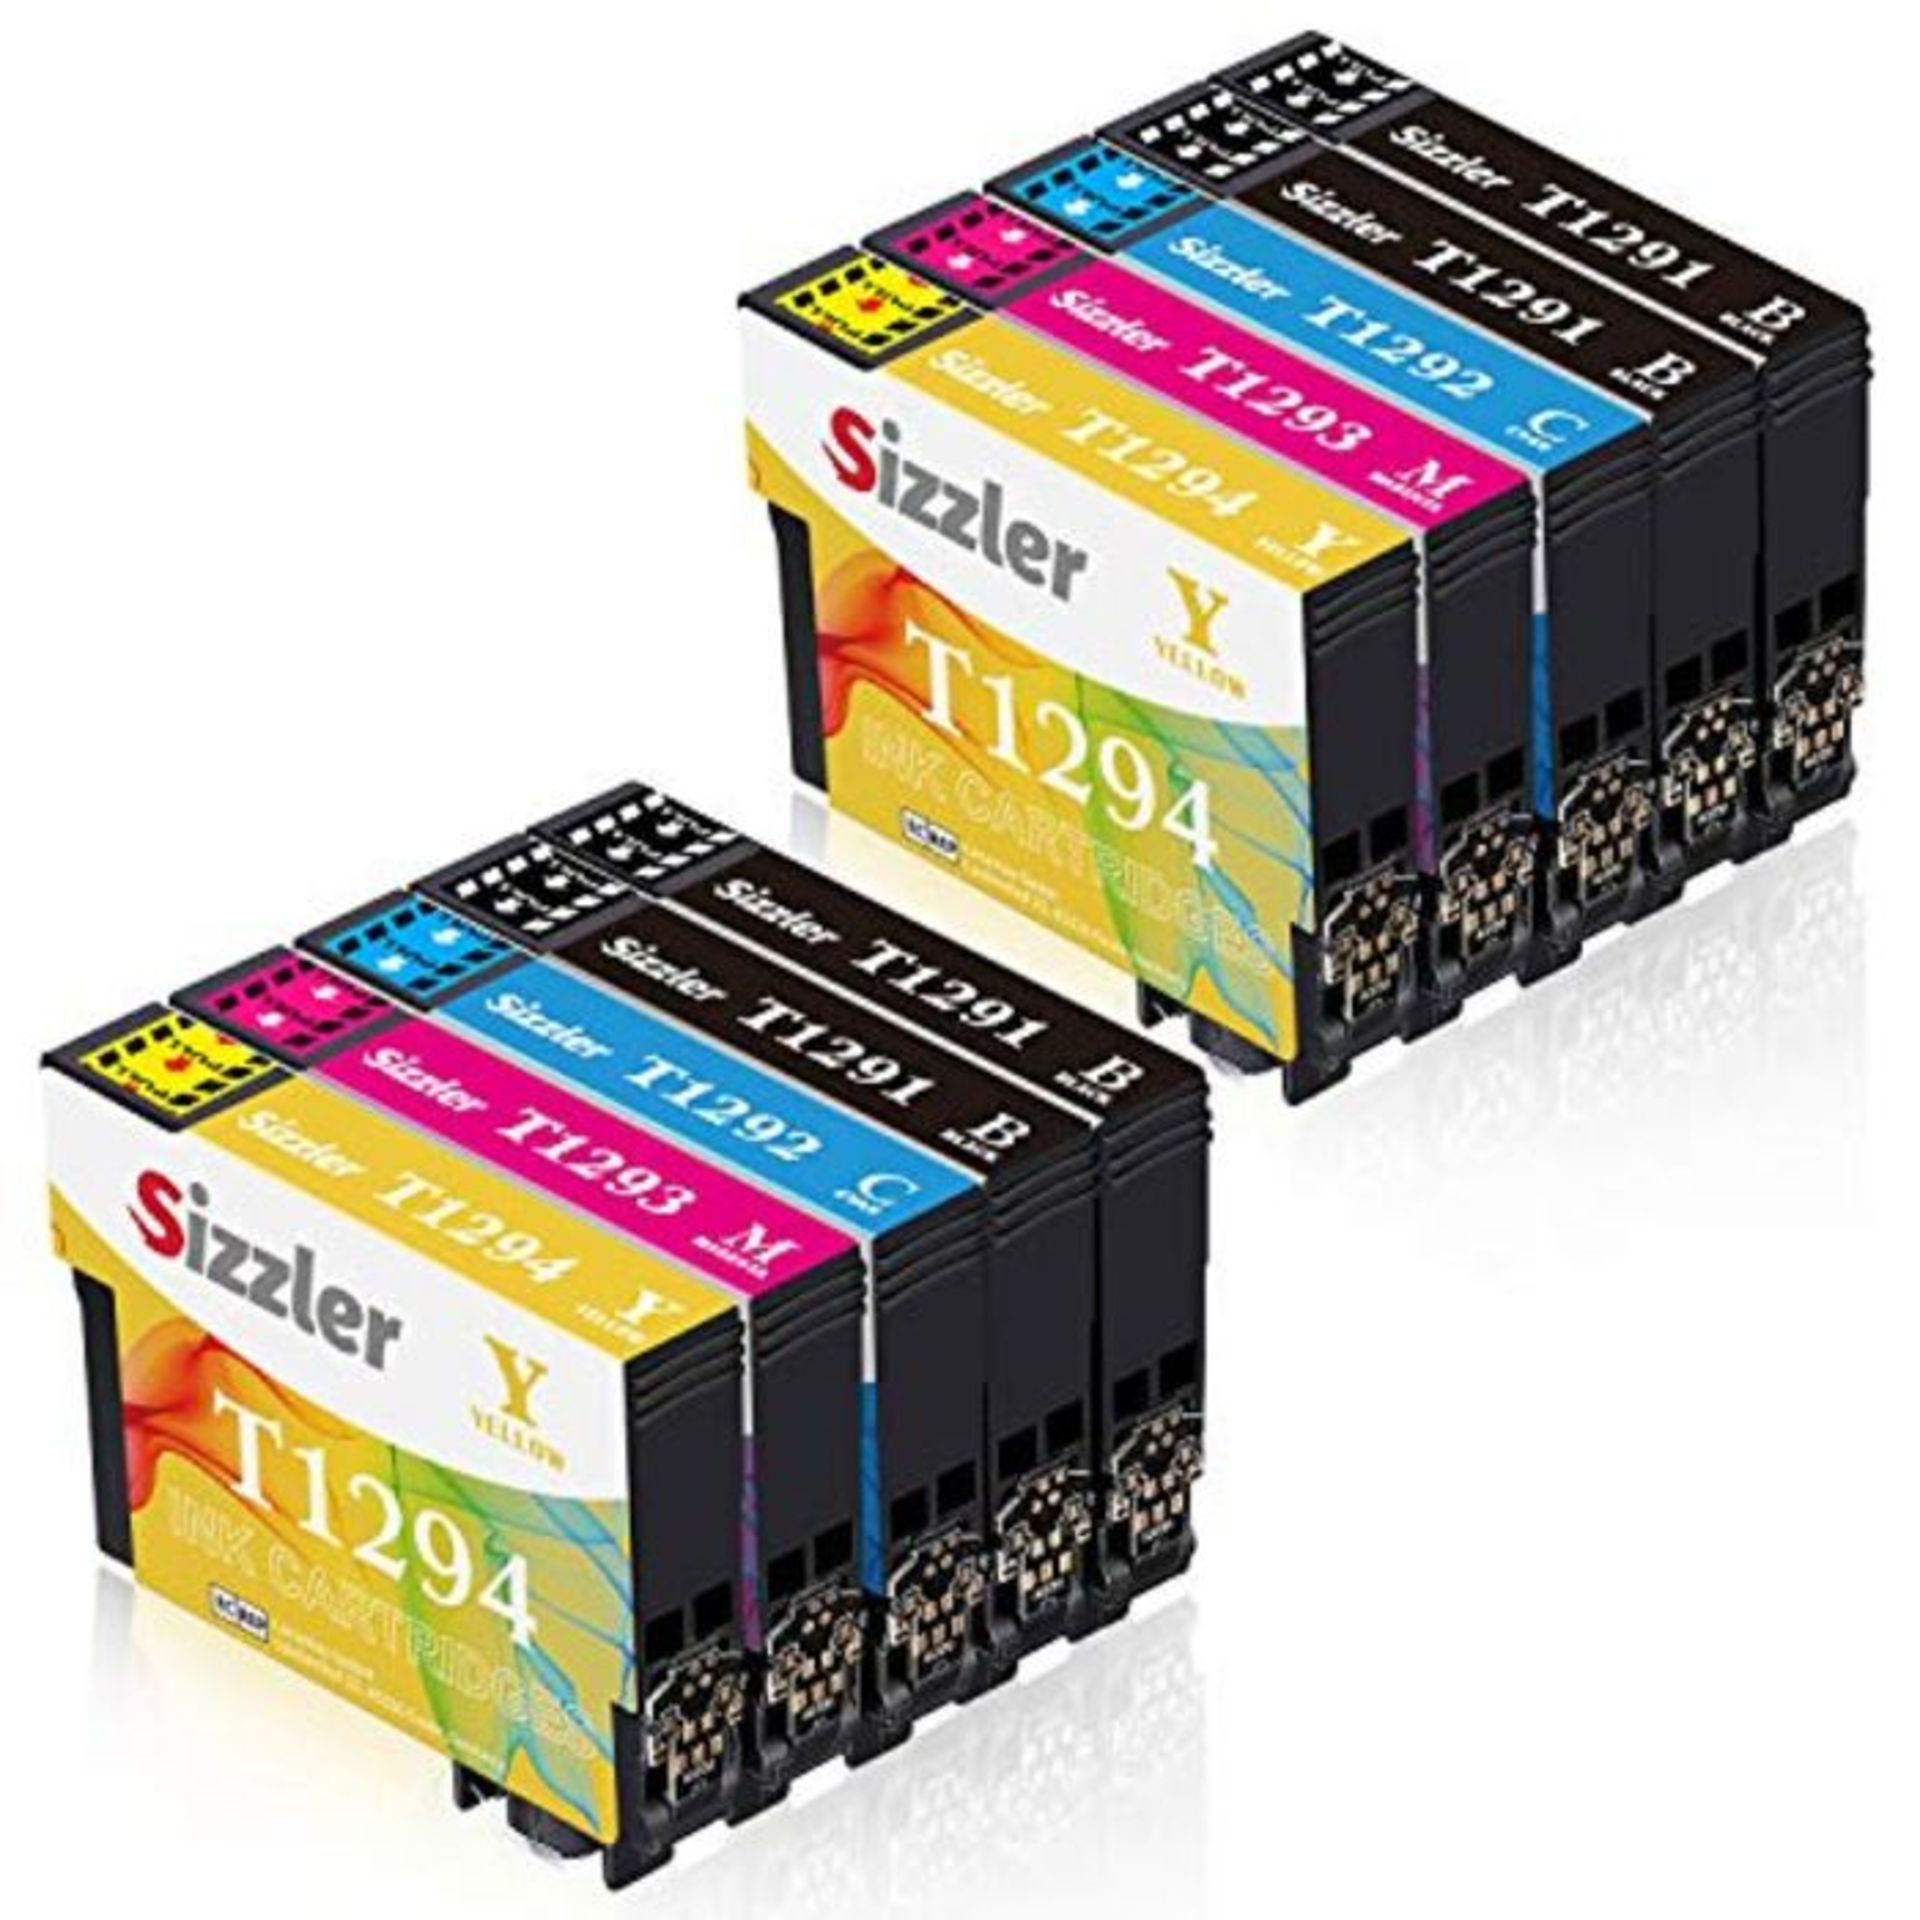 Sizzler T1295 Multipack Ink Cartridges Replacement for T1291 T1292 T1293 T1294 Compati